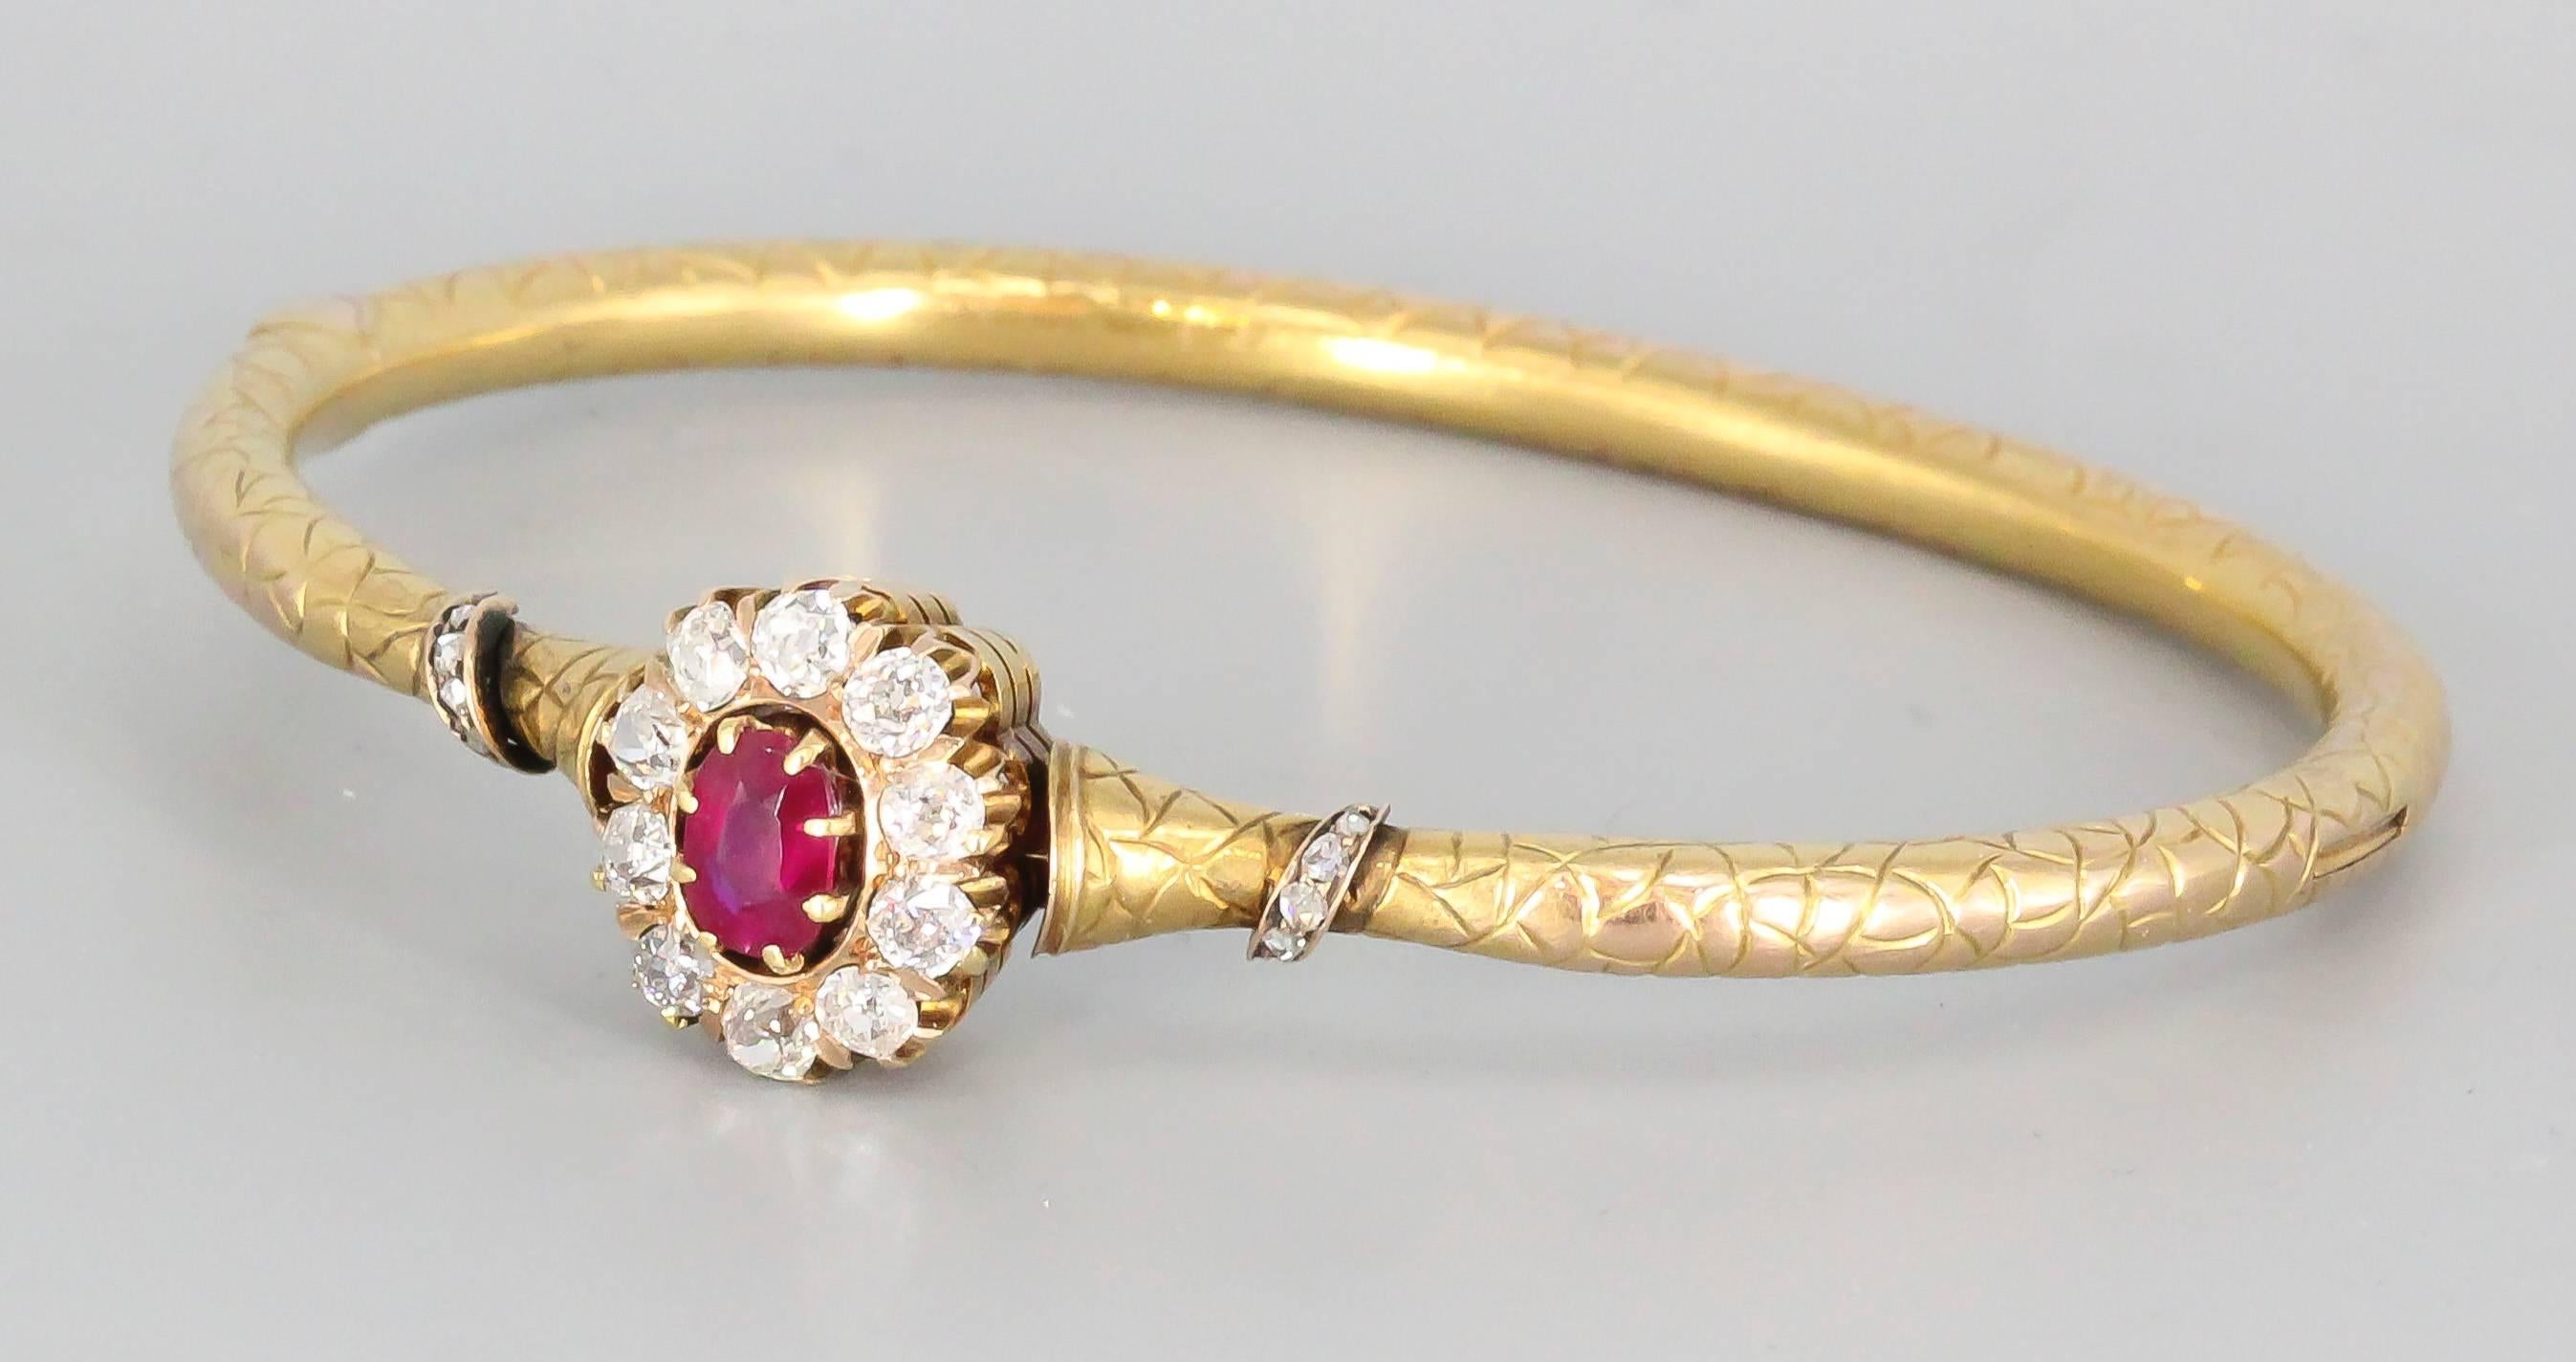 Very rare diamond, ruby and 14K yellow gold antique bangle bracelet by August Wilhem Holmstrom, workmaster for Faberge, circa 1890s. This slender bracelet has one high quality oval ruby, approx. .65cts, framed by 10 old-mine cut diamonds, approx.